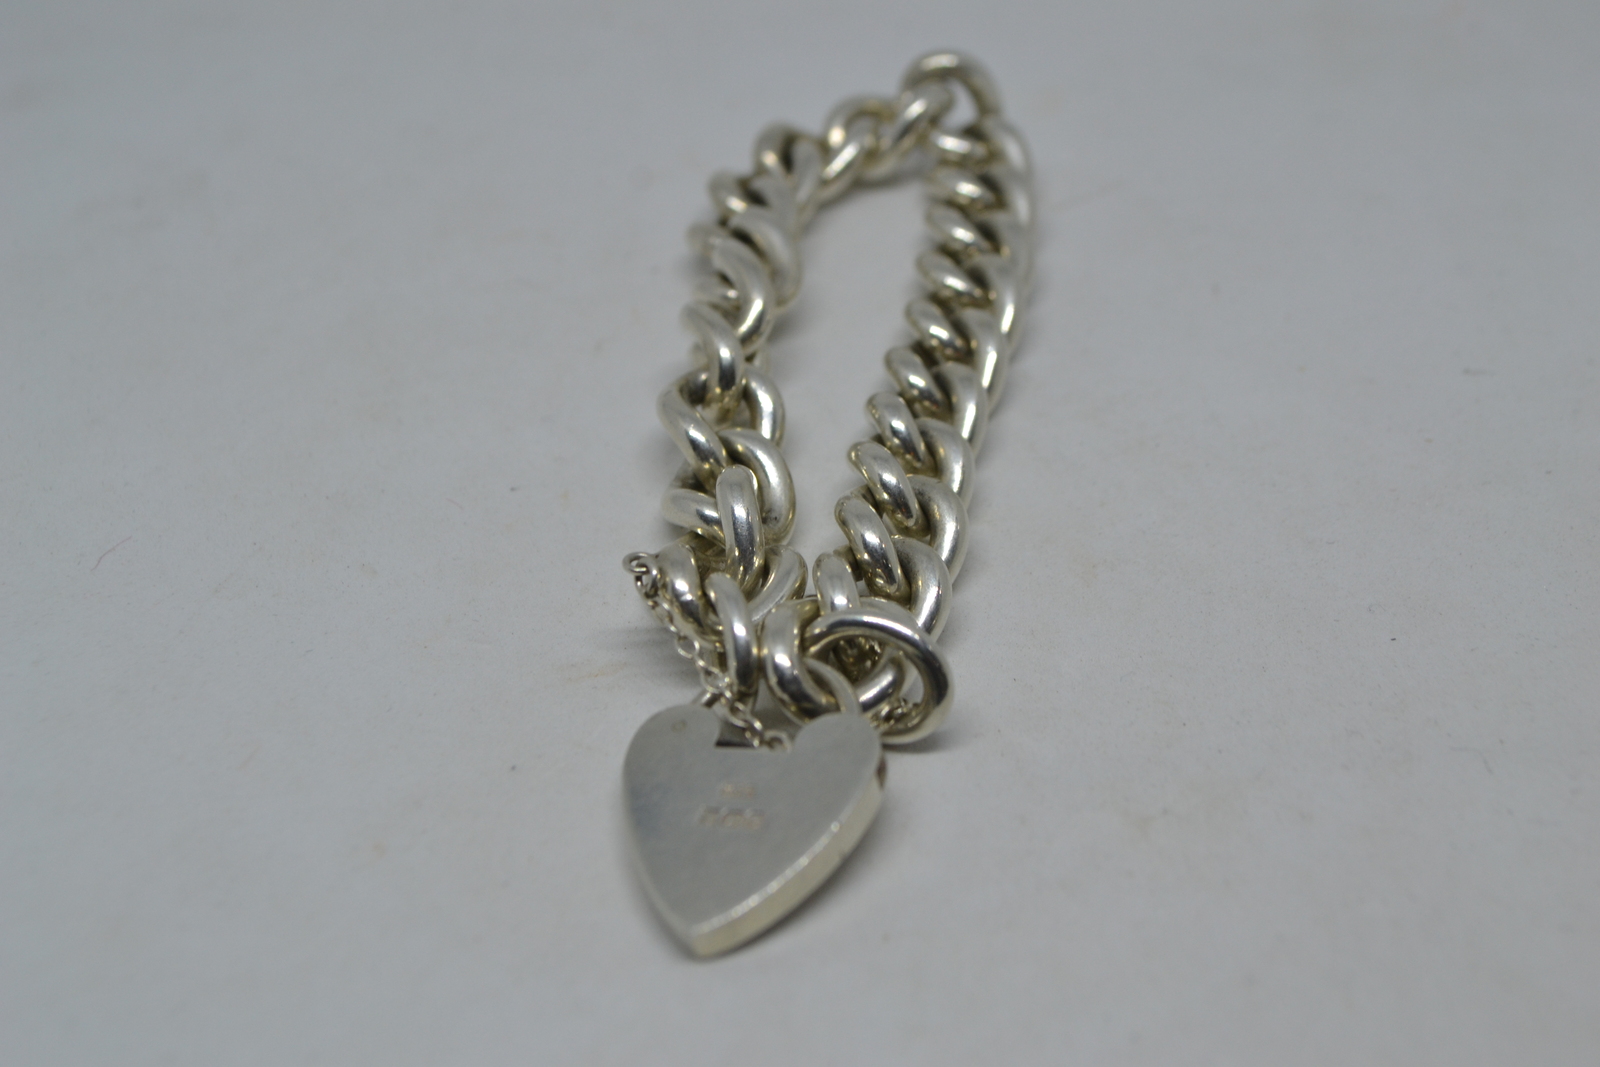 Solid Sterling Silver Curb Link Bracelet  With Heart PadLock And Safety Chain